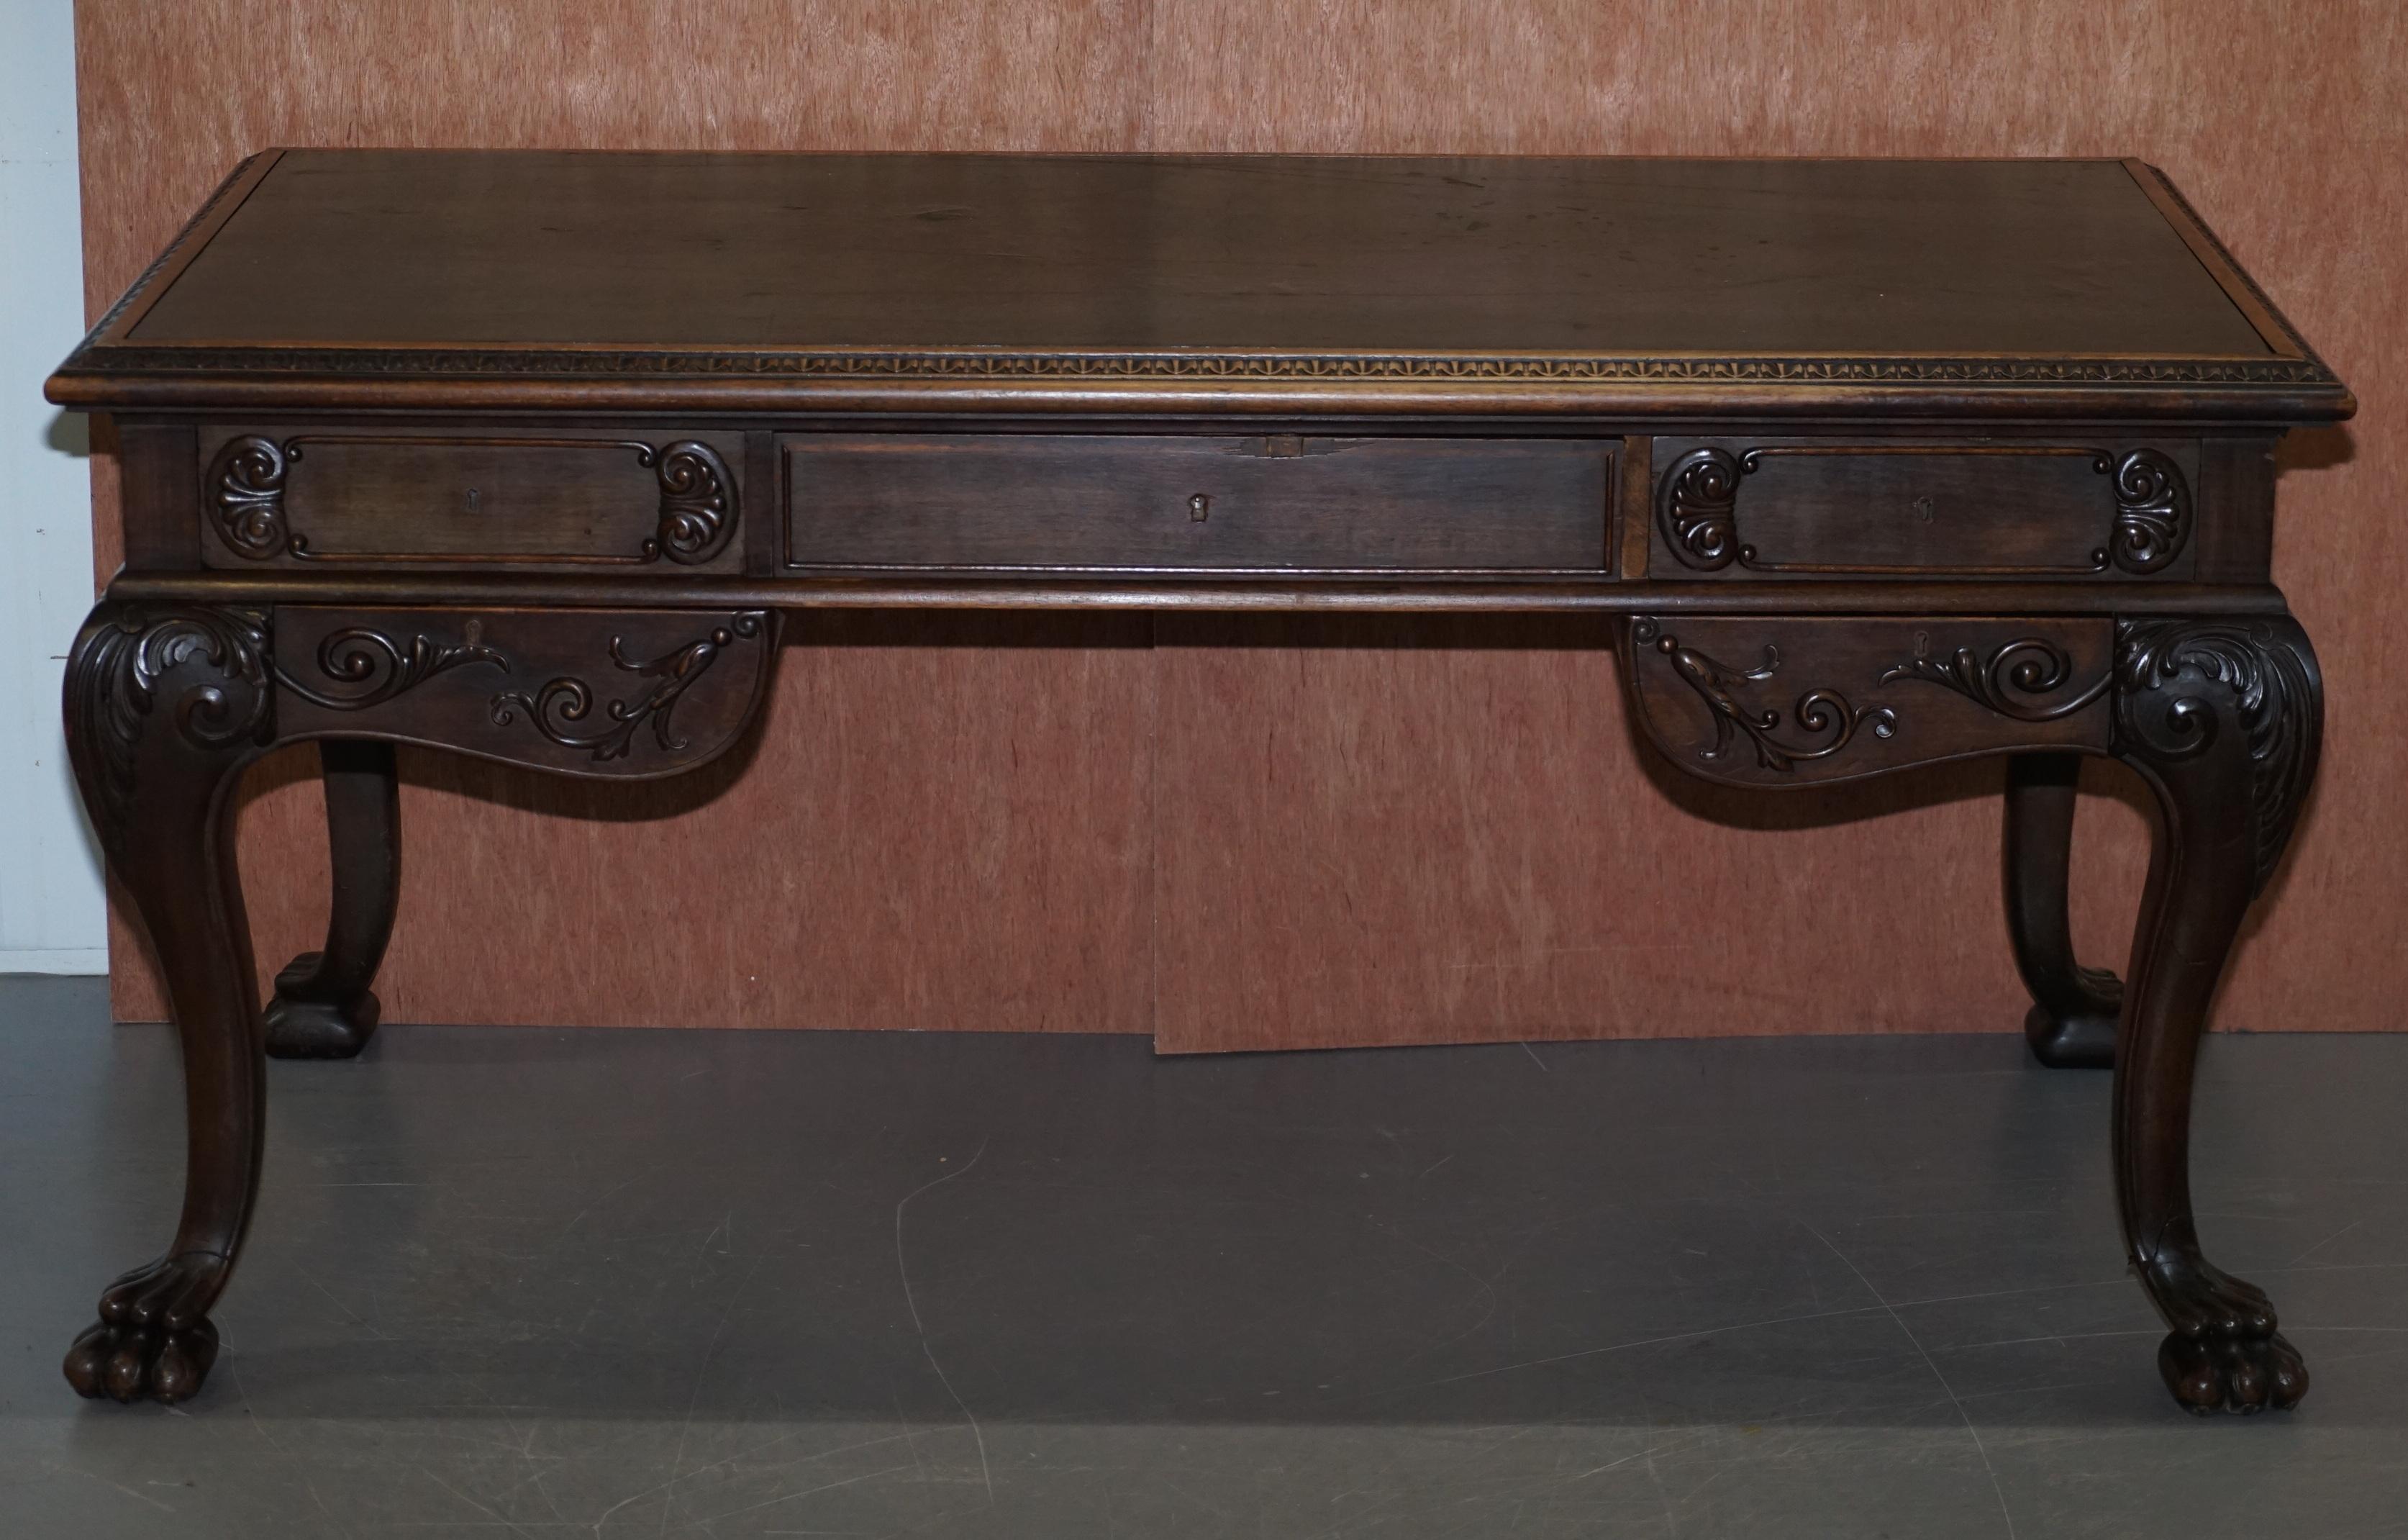 We are delighted to offer for sale this lovely oversized ornately hand carved writing desk with green leather top

A good looking, well made and decorative desk, with lovely hand carved lion hairy paw feet, a thick green leather writing surface,